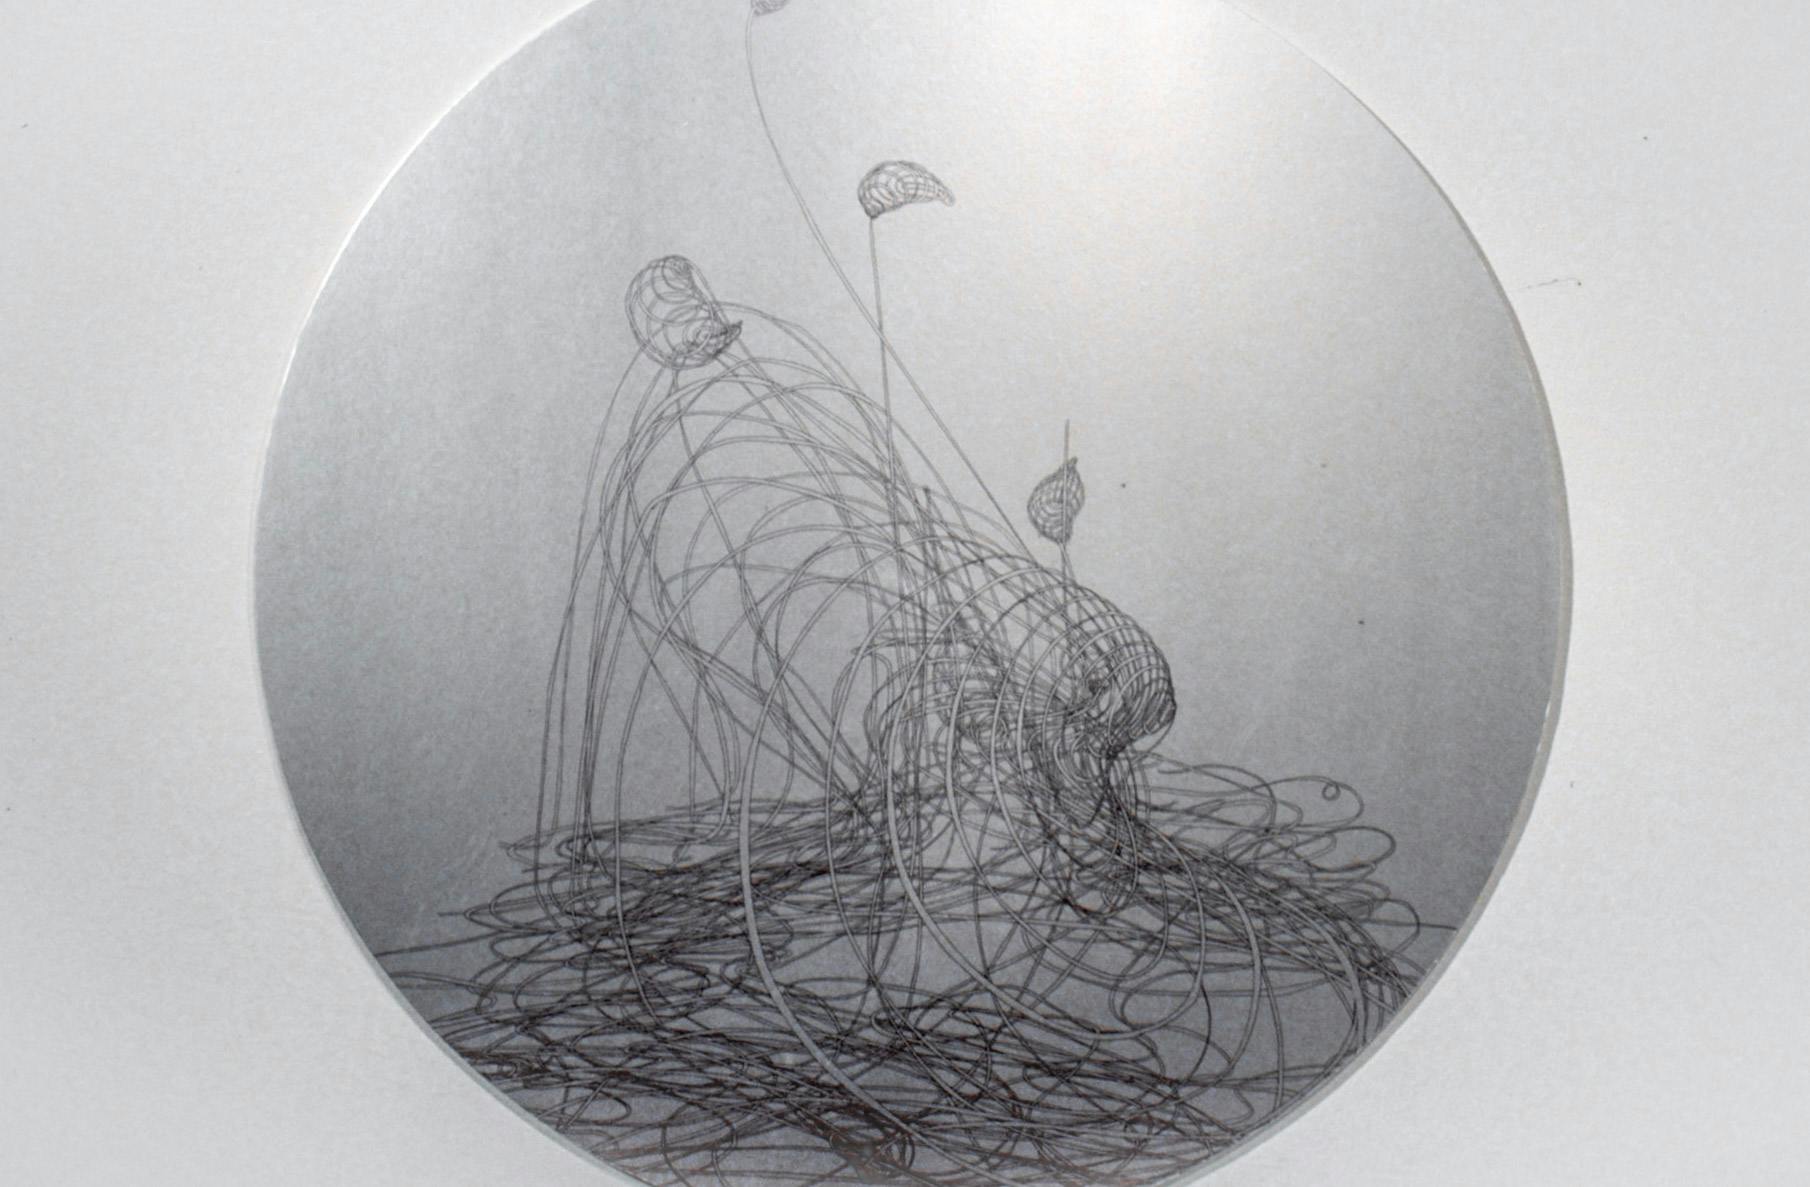 This is a close-up view of a circular shaped sculpture made by Lucy Pullen. On its silver metallic surface, an abstract line drawing is made. The drawing looks like leaves emerging from fishing nets.